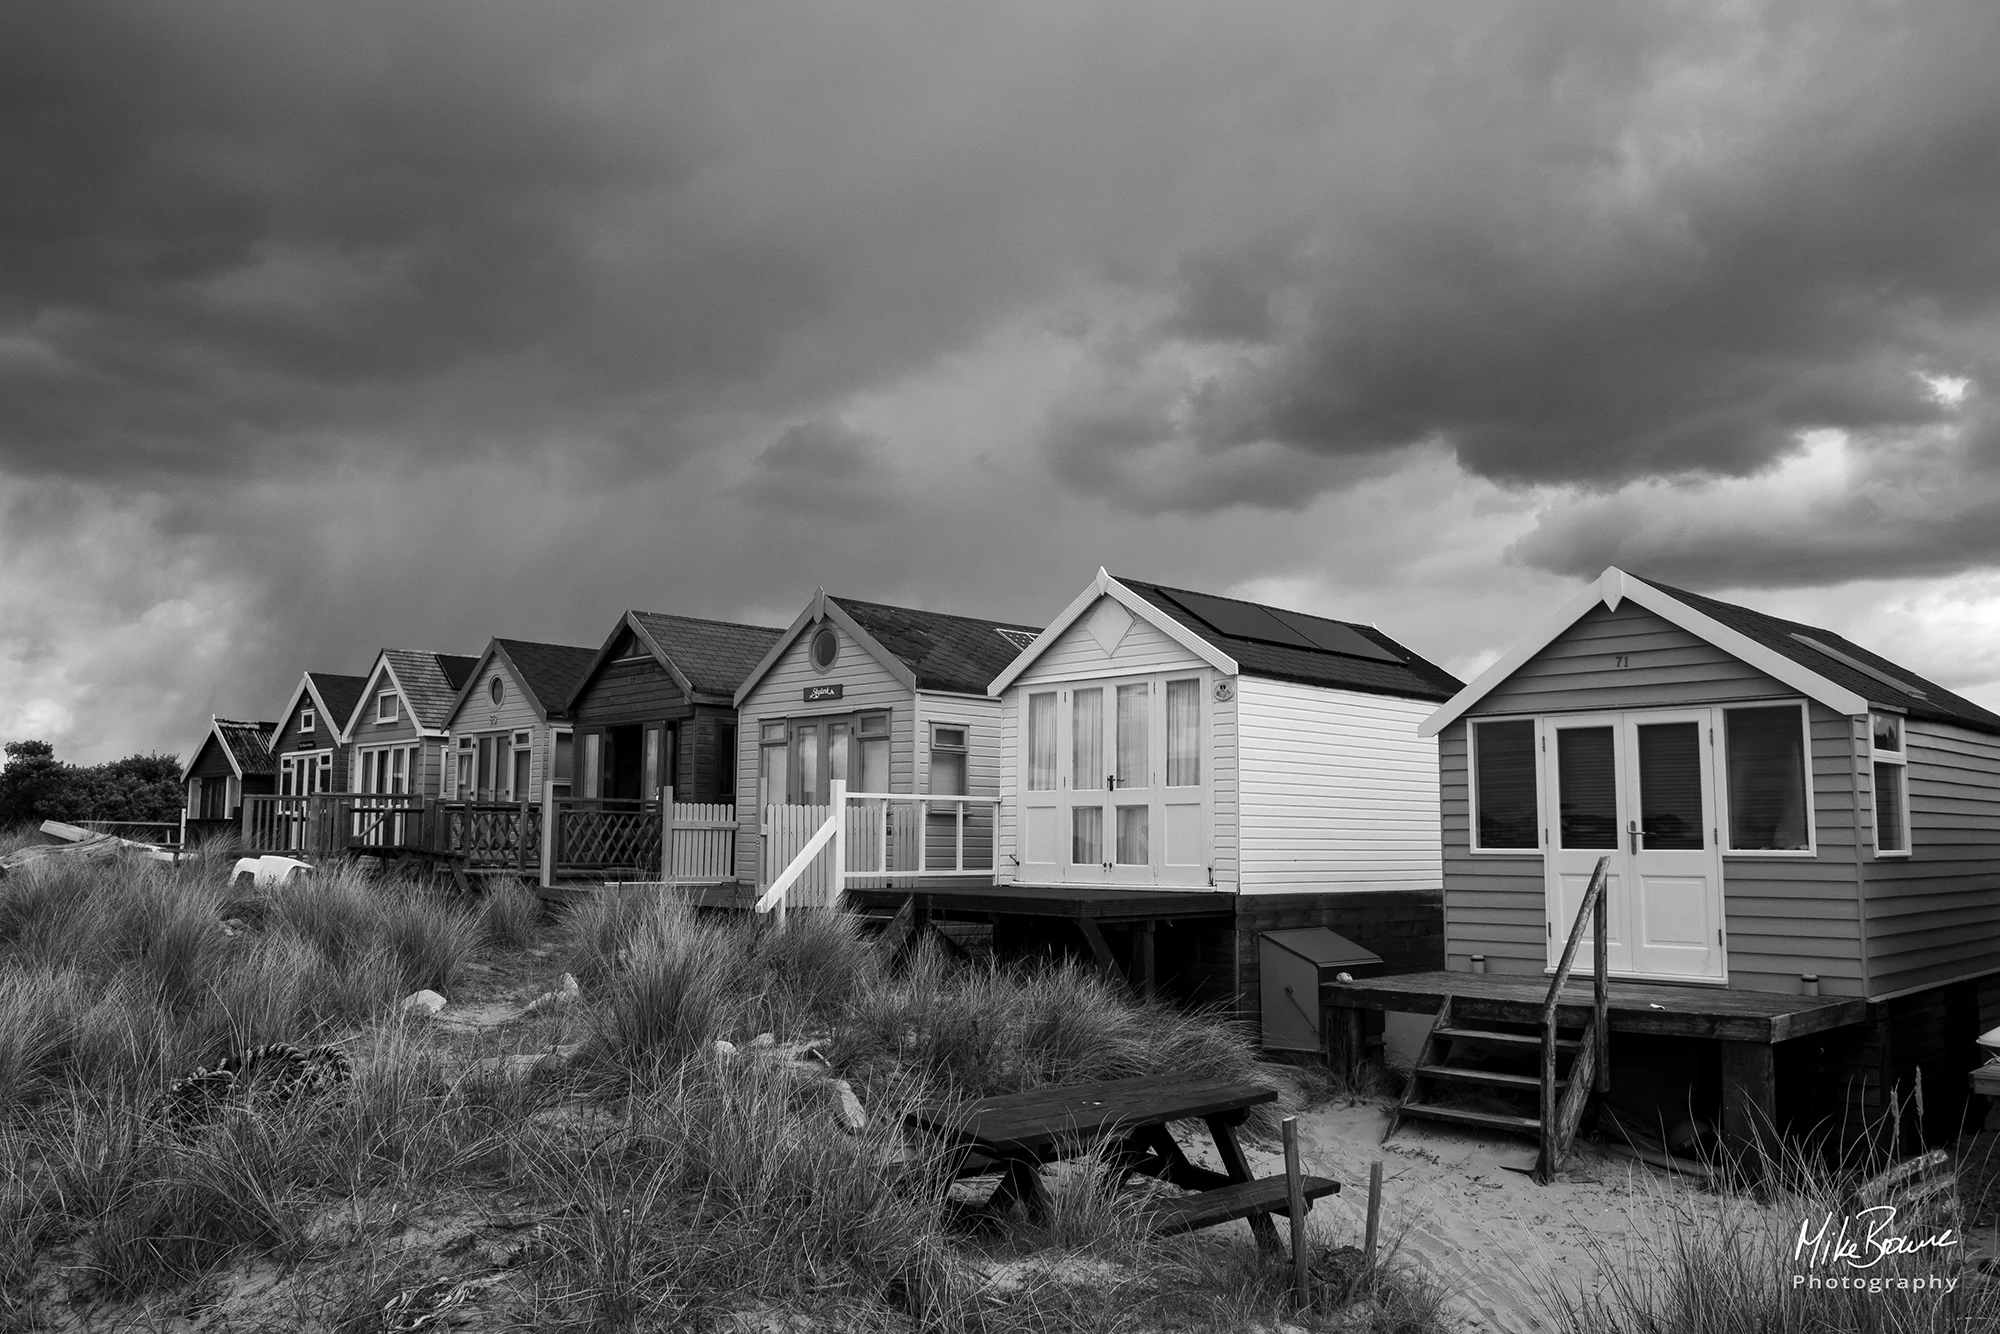 British beach huts and long grasses under heavy storm clouds